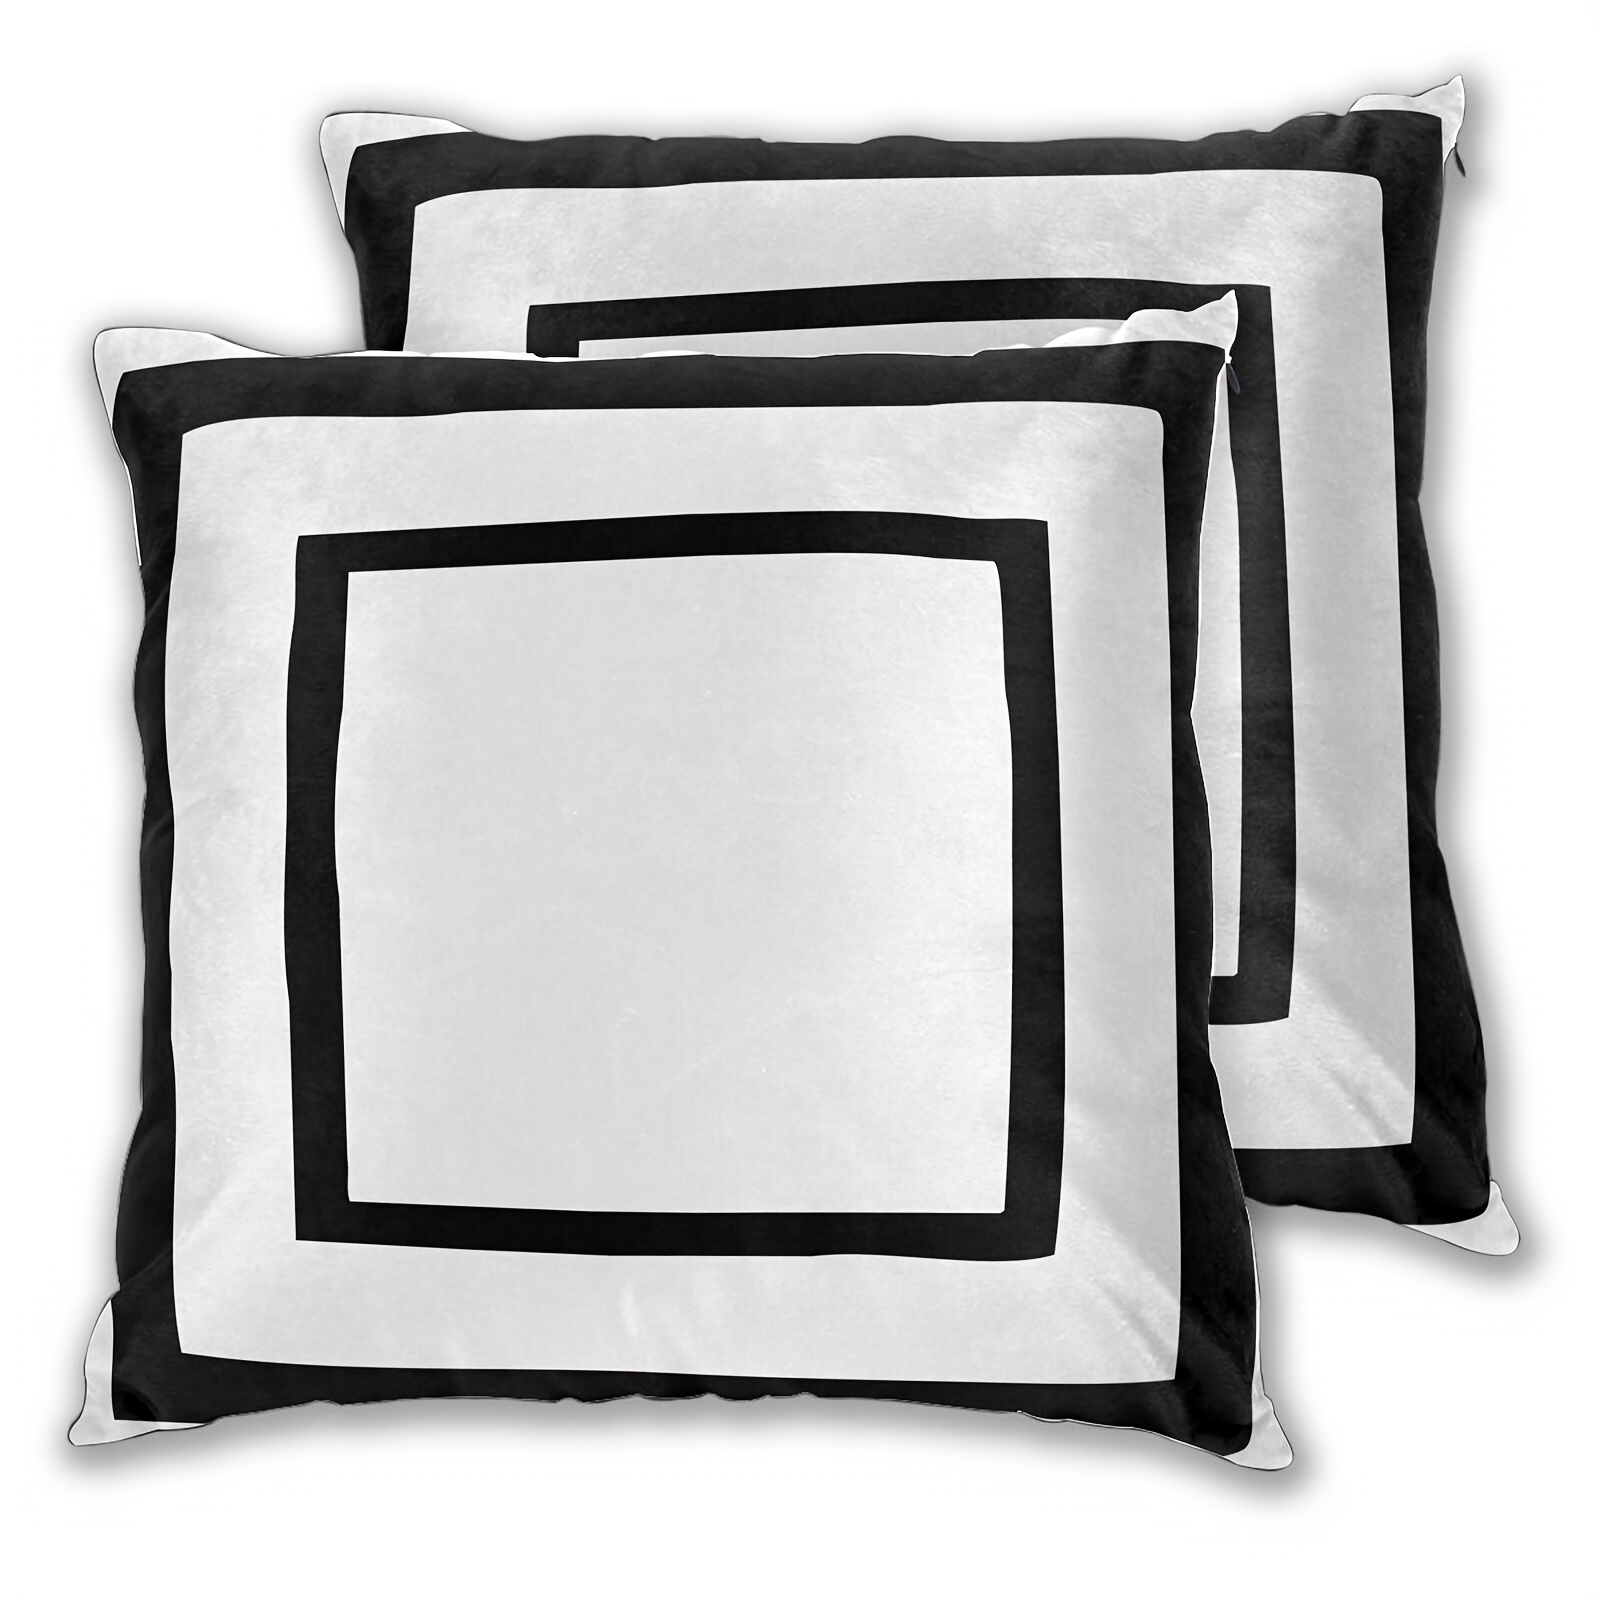 

2pcs Short Plush Outdoor Waterproof Throw Pillow Covers Geometric Pillowcases Black And White Pillow Covers For Patio Garden 18 X 18 Inches (no Pillow Core)